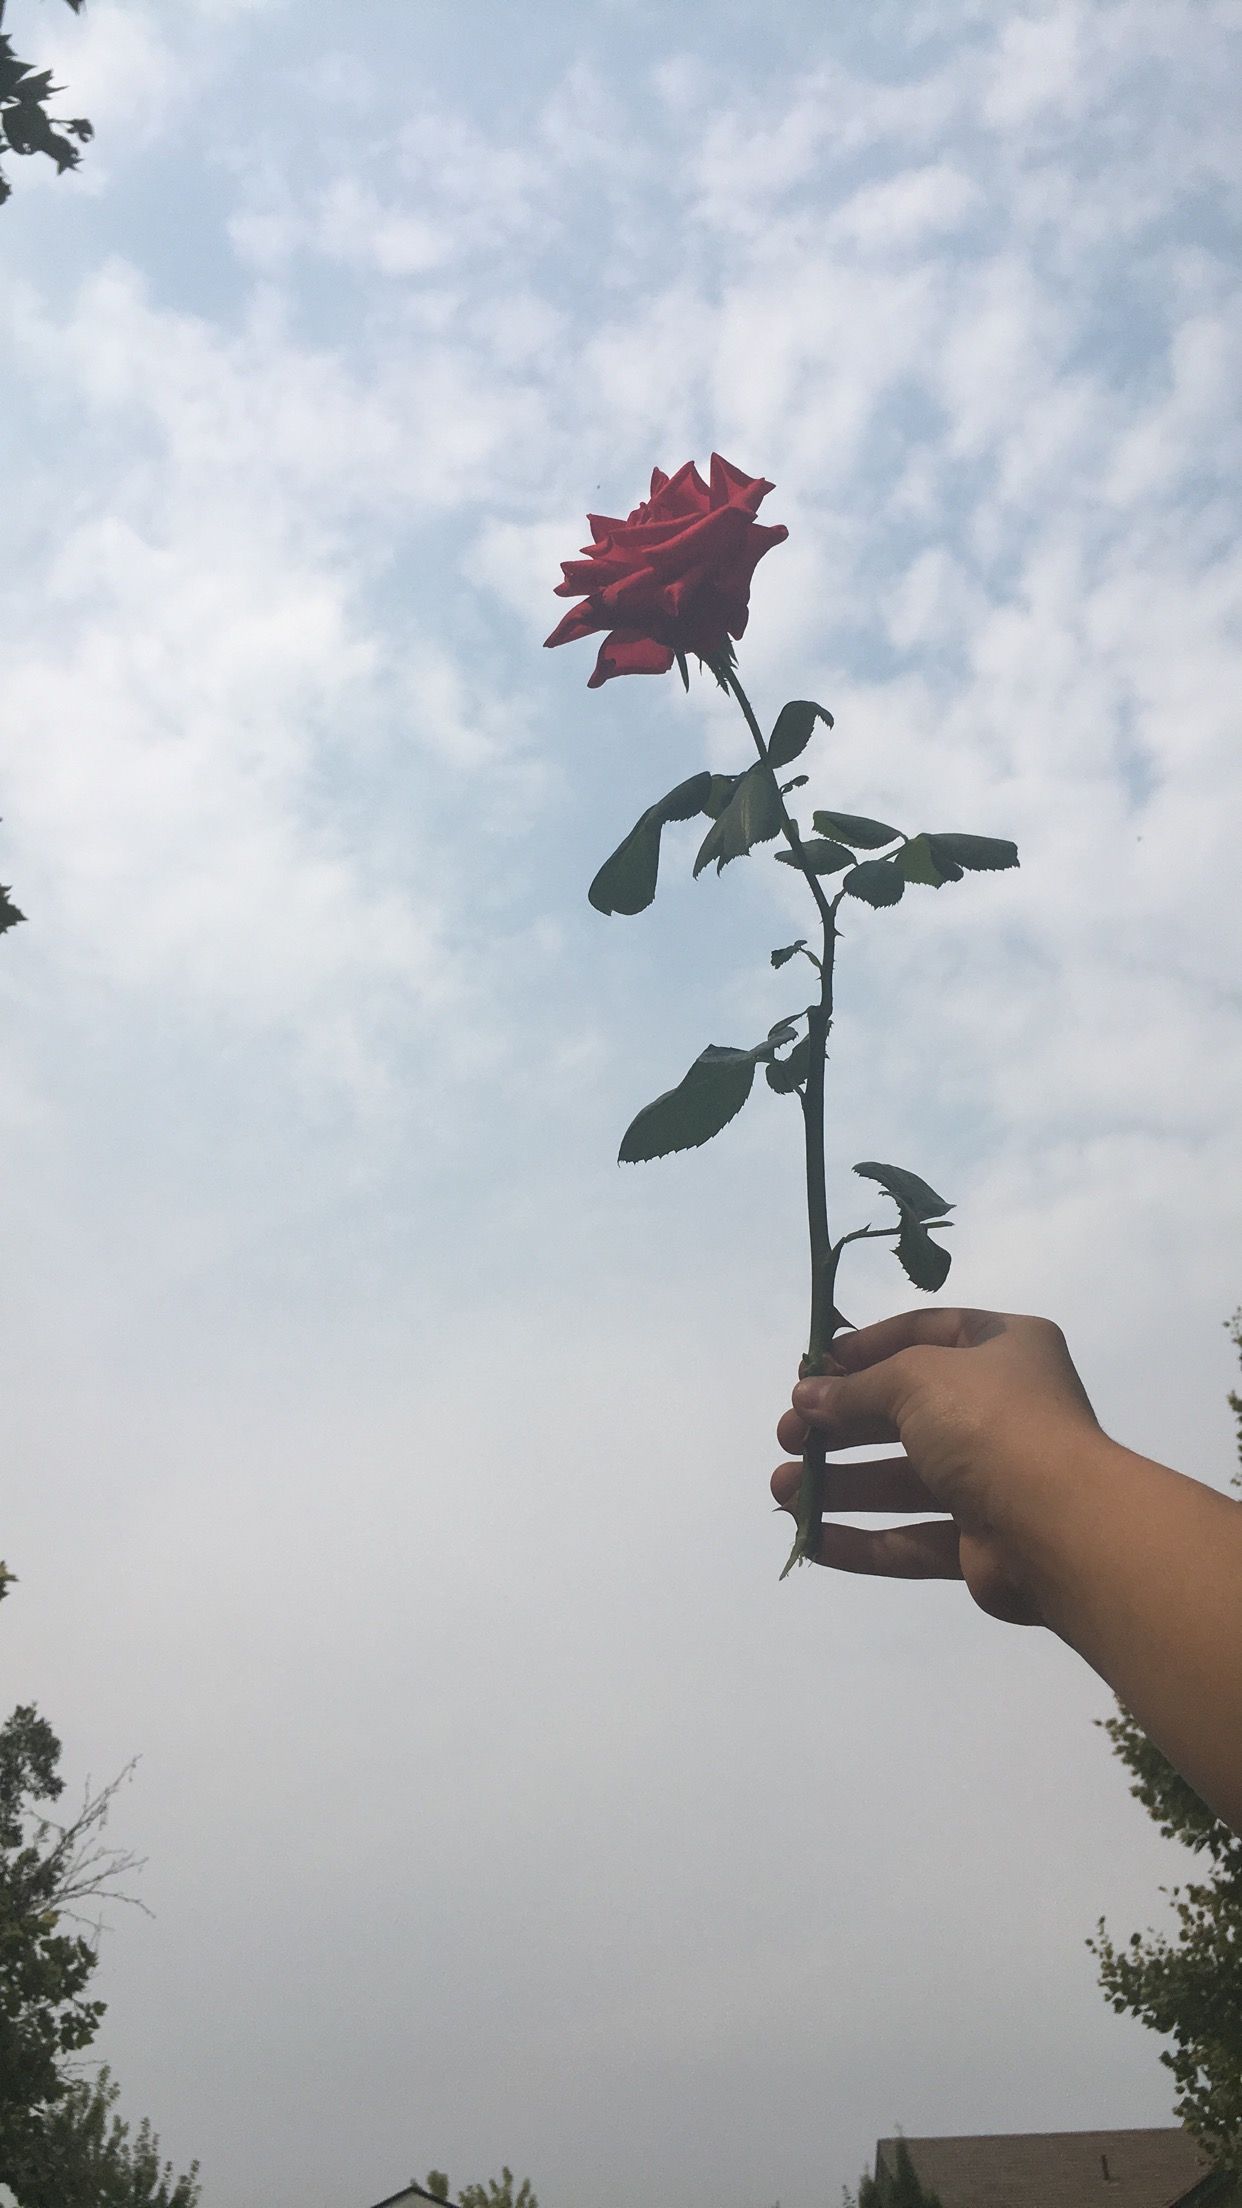 A hand holding a red rose against a cloudy sky - Roses